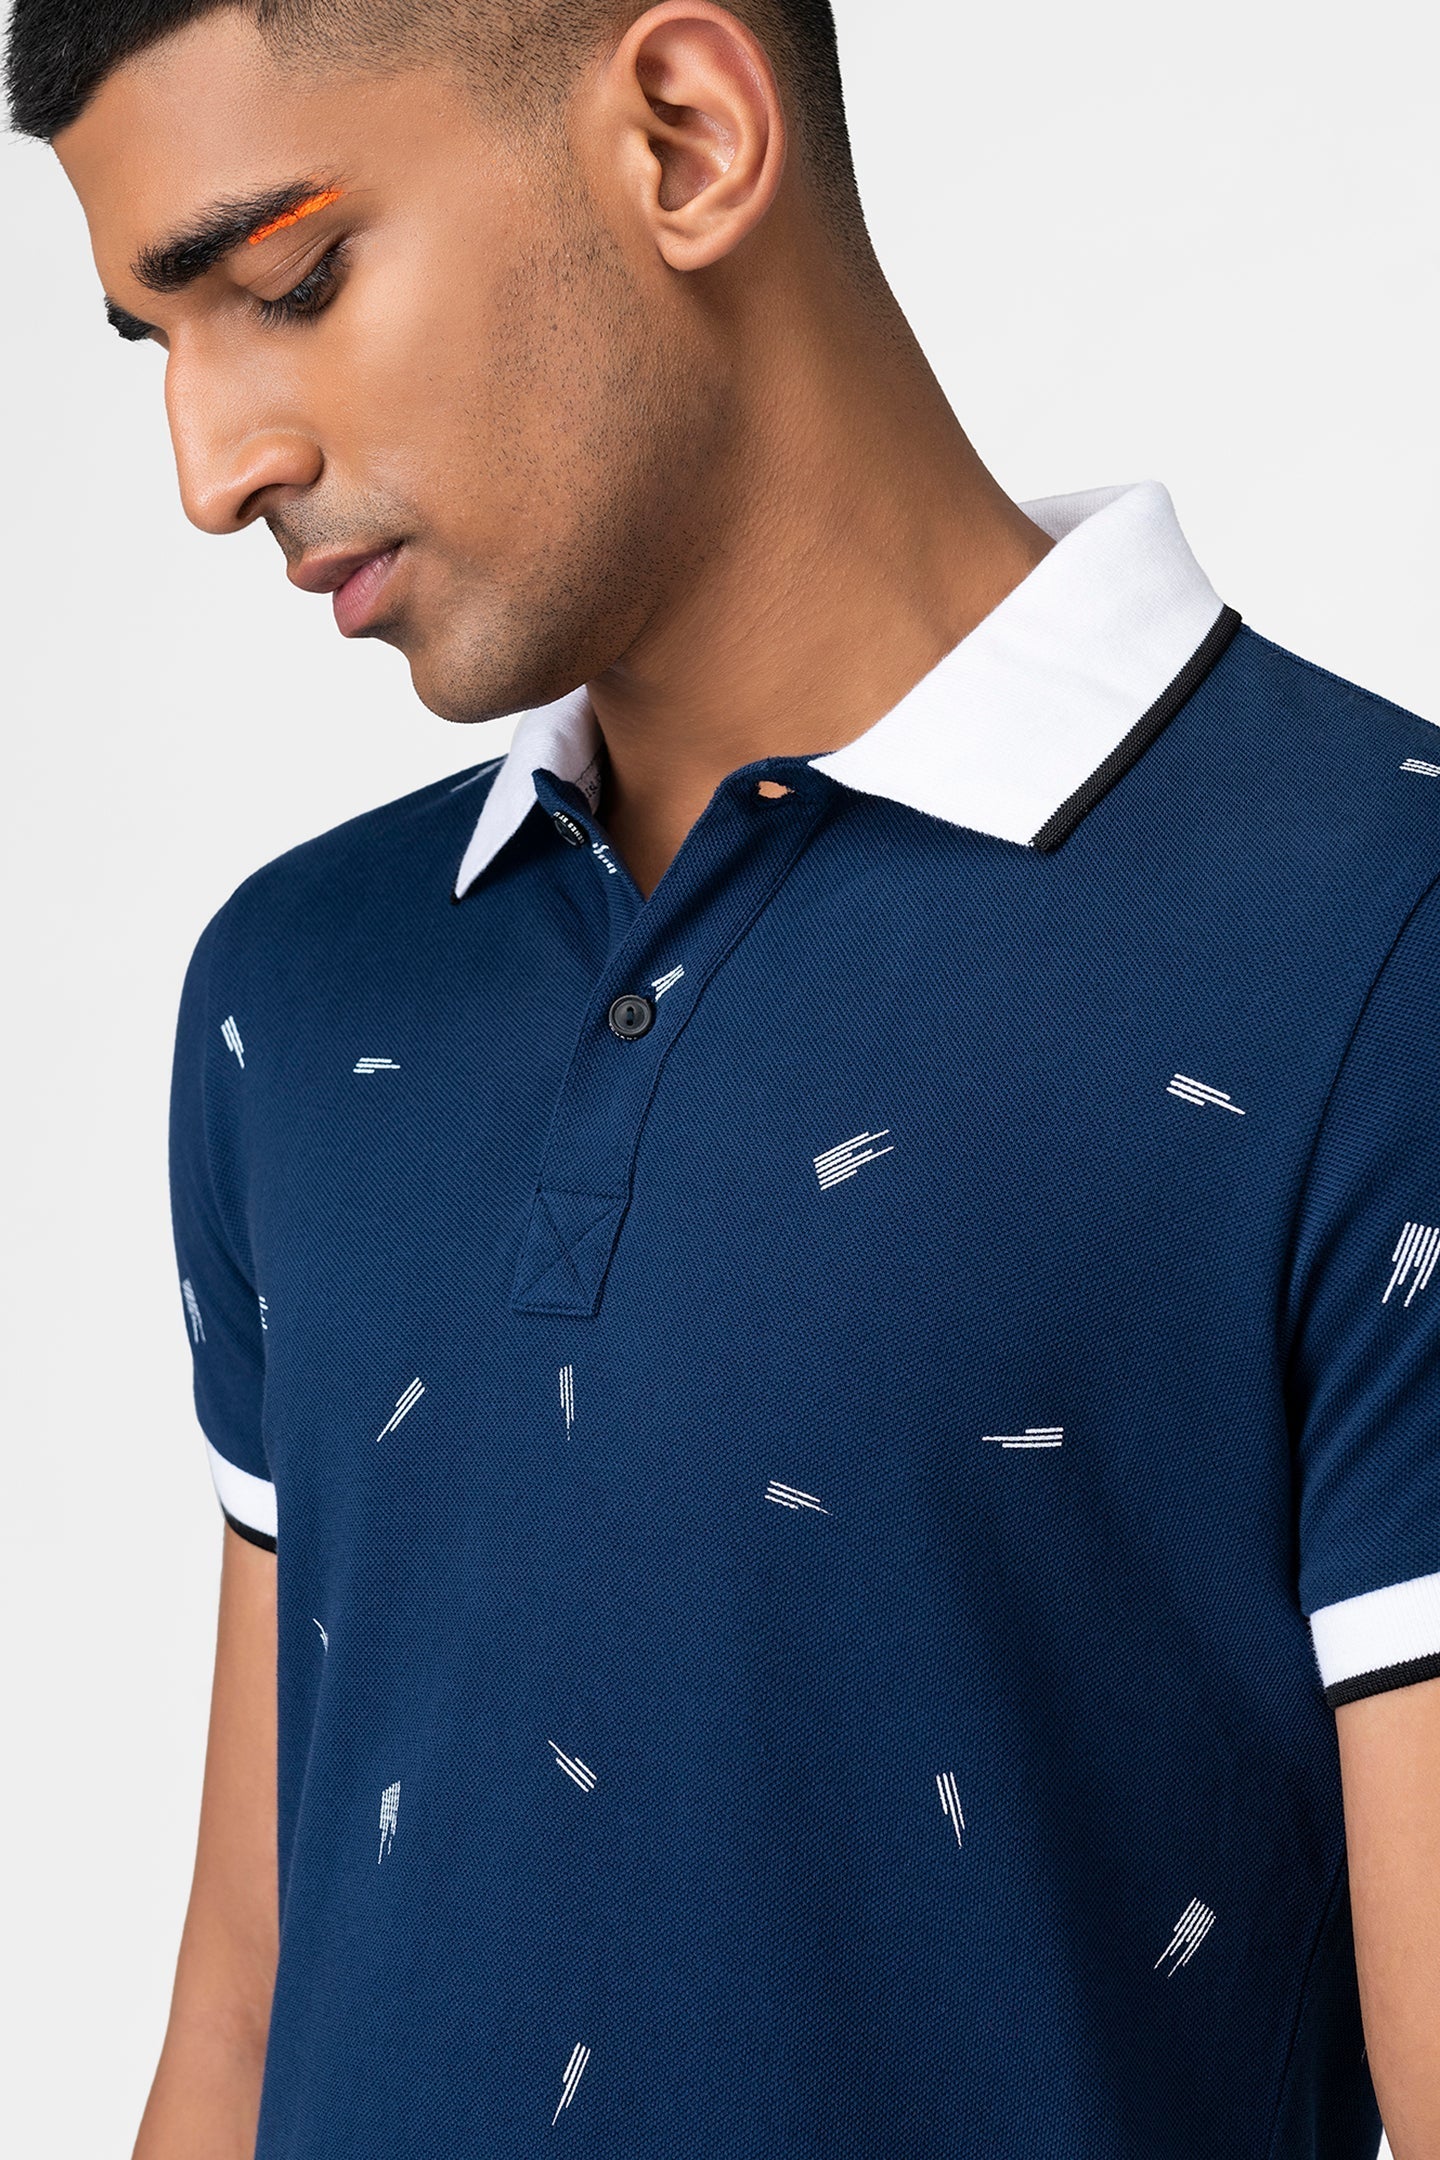 Buy online Polo T-shirt at best price in india Geneslecoanethemant – Genes Online Store